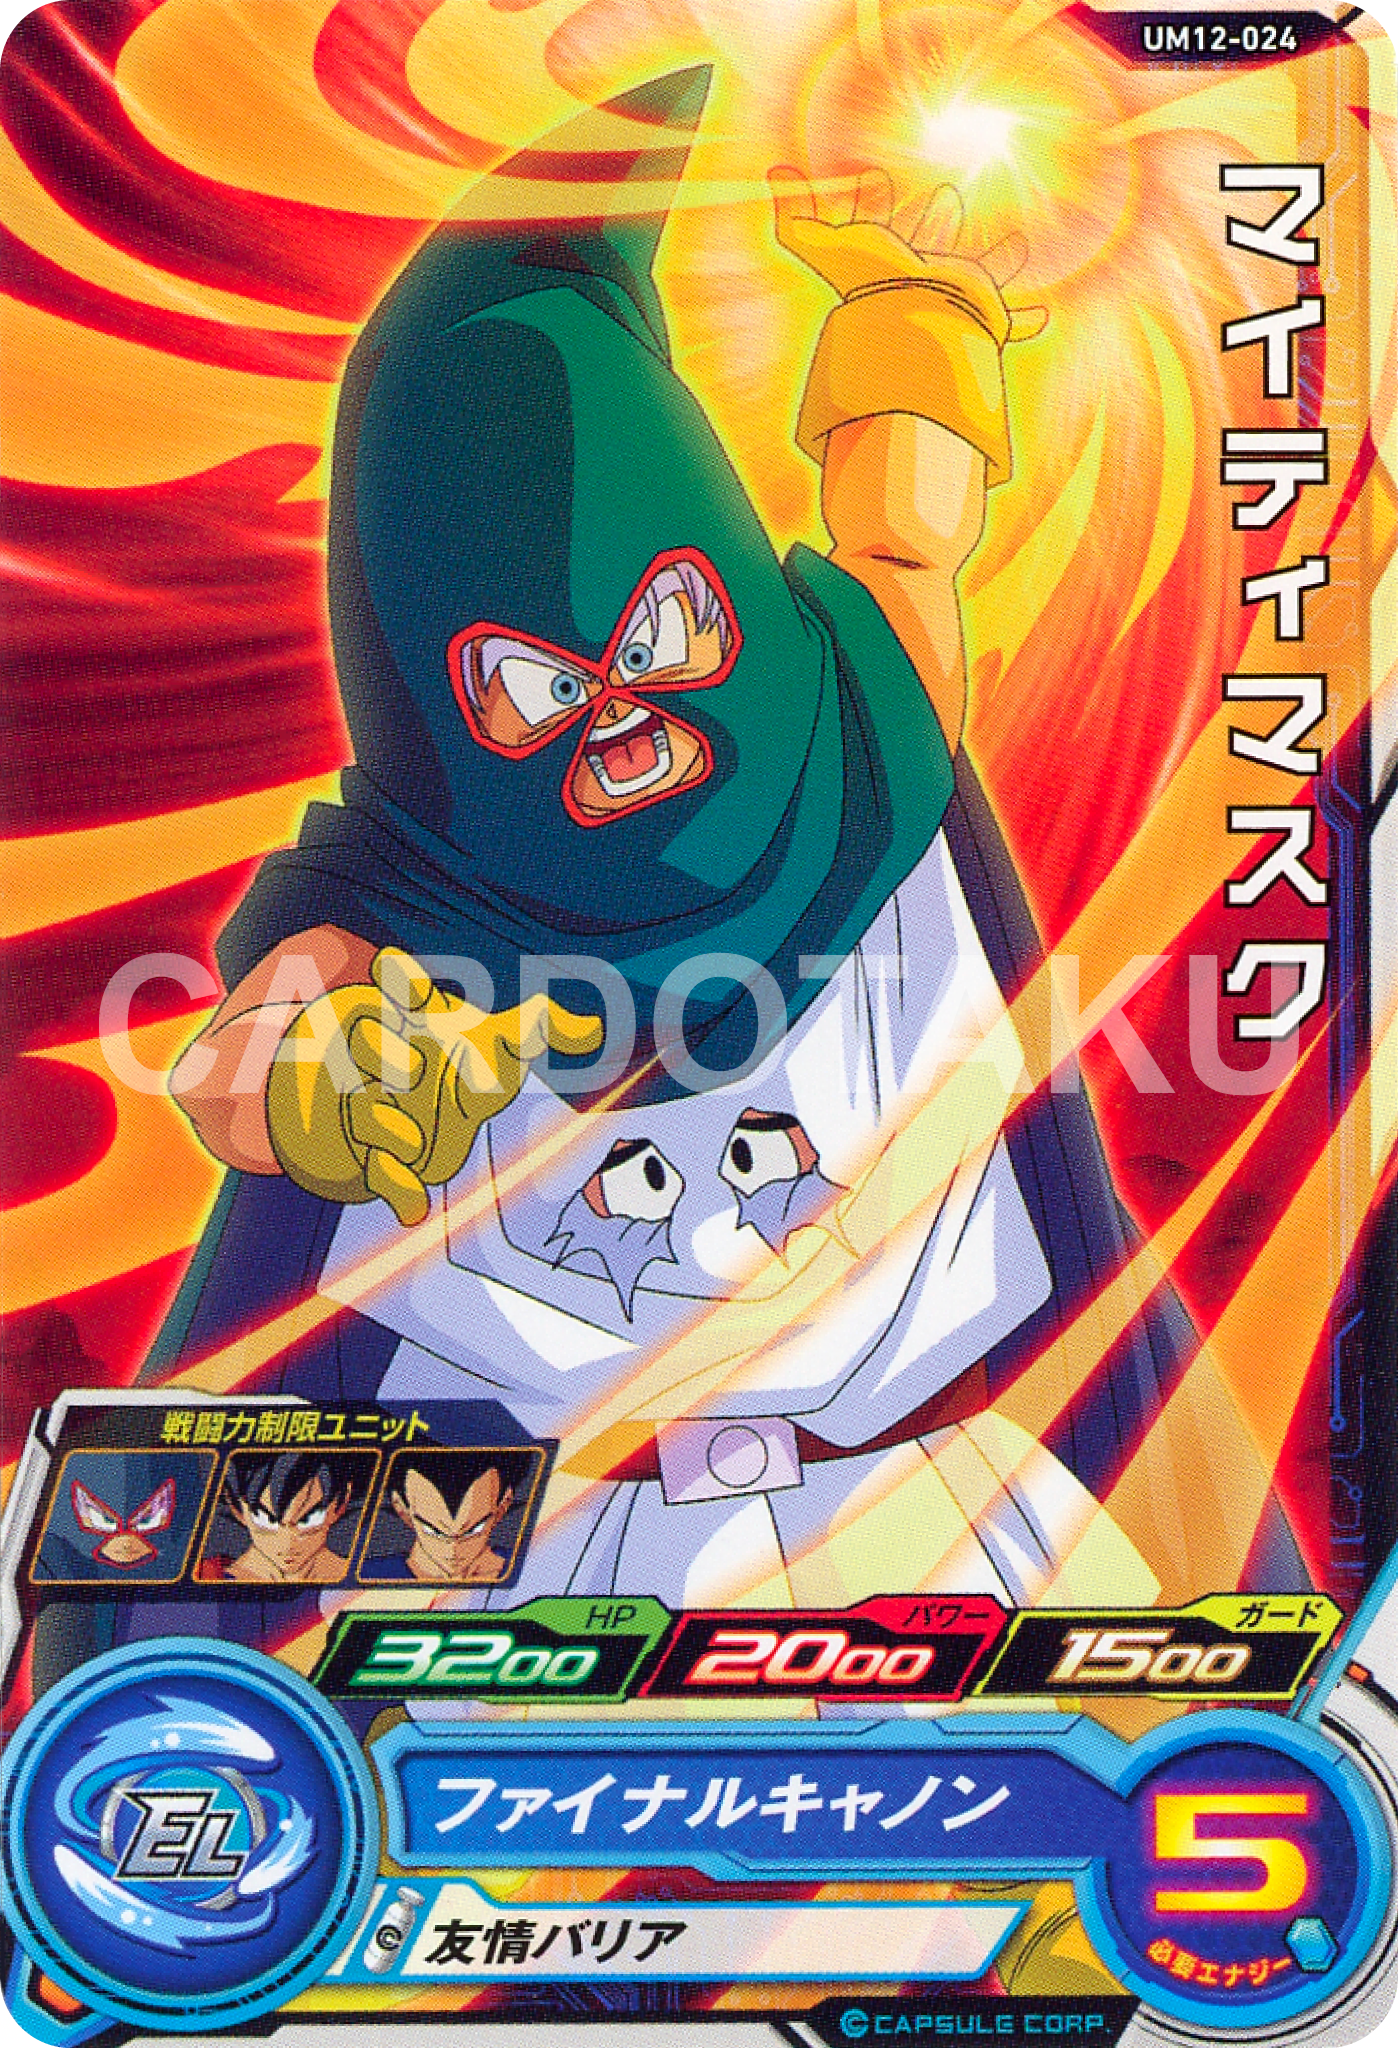 SUPER DRAGON BALL HEROES UM12-024 Common card Mighty Mask